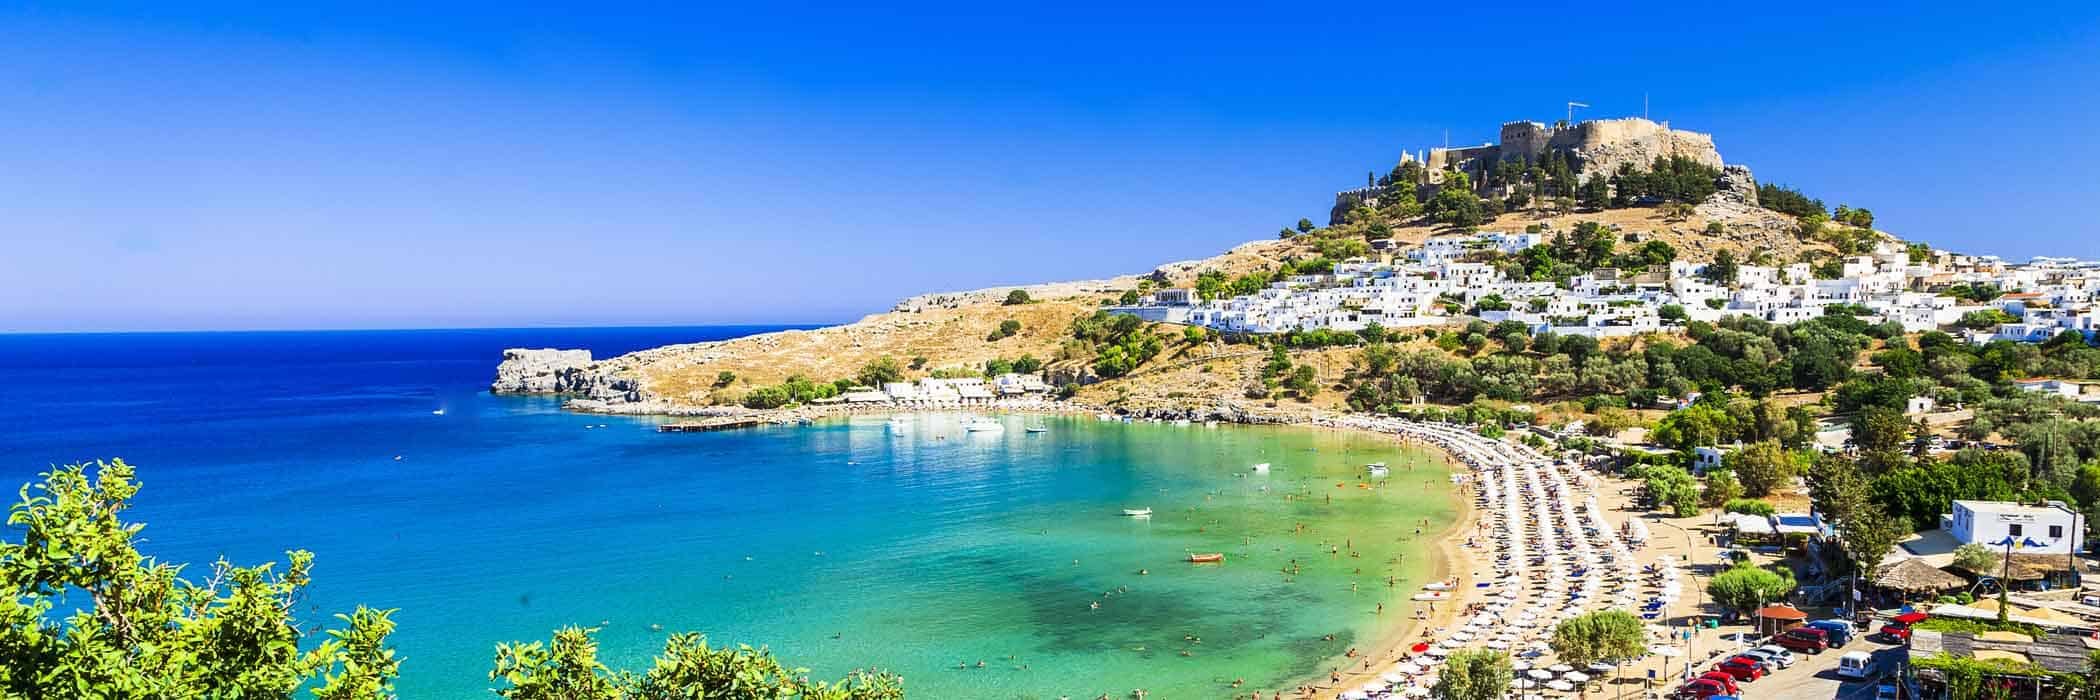 Holidays To Greece - Lindos Beach in Rhodes